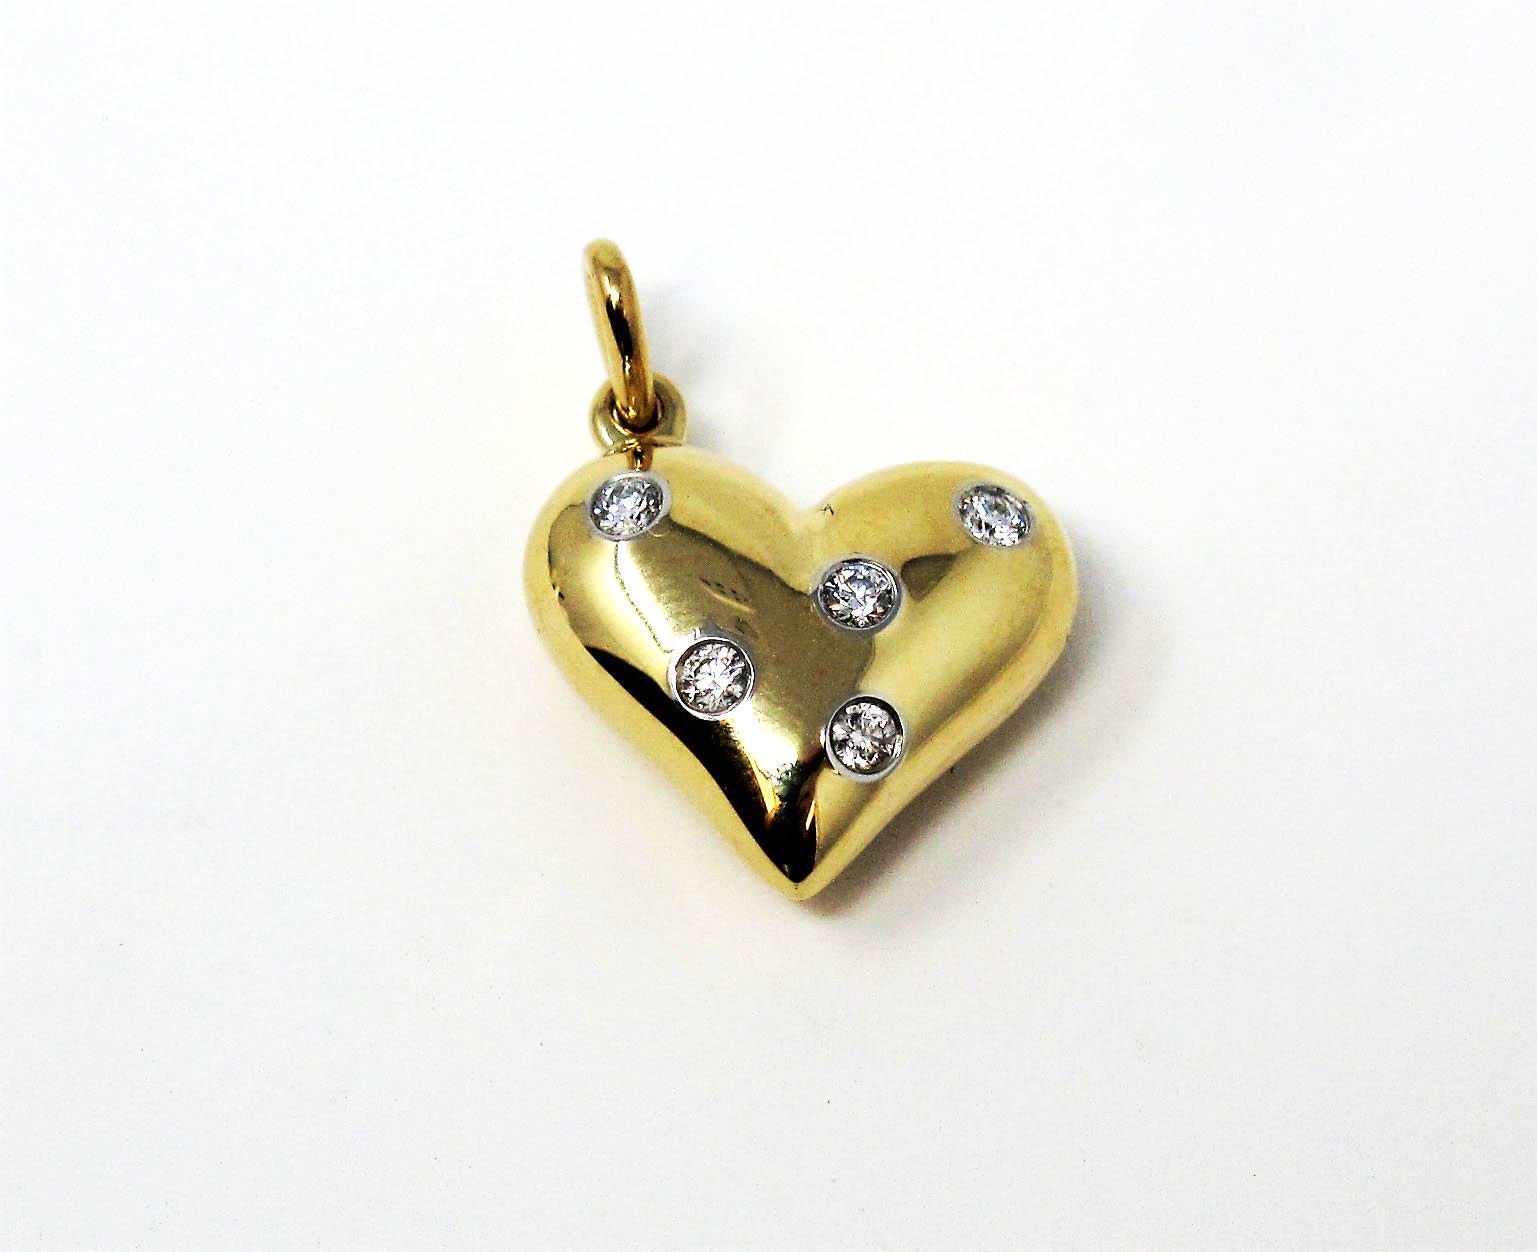 Absolutely gorgeous Etoile diamond heart pendant from Tiffany & Co. Dazzling round diamonds are scattered throughout this solid gold heart, offering sparkle from all angles. The feminine, romantic style radiates on the neck, while the classic shape